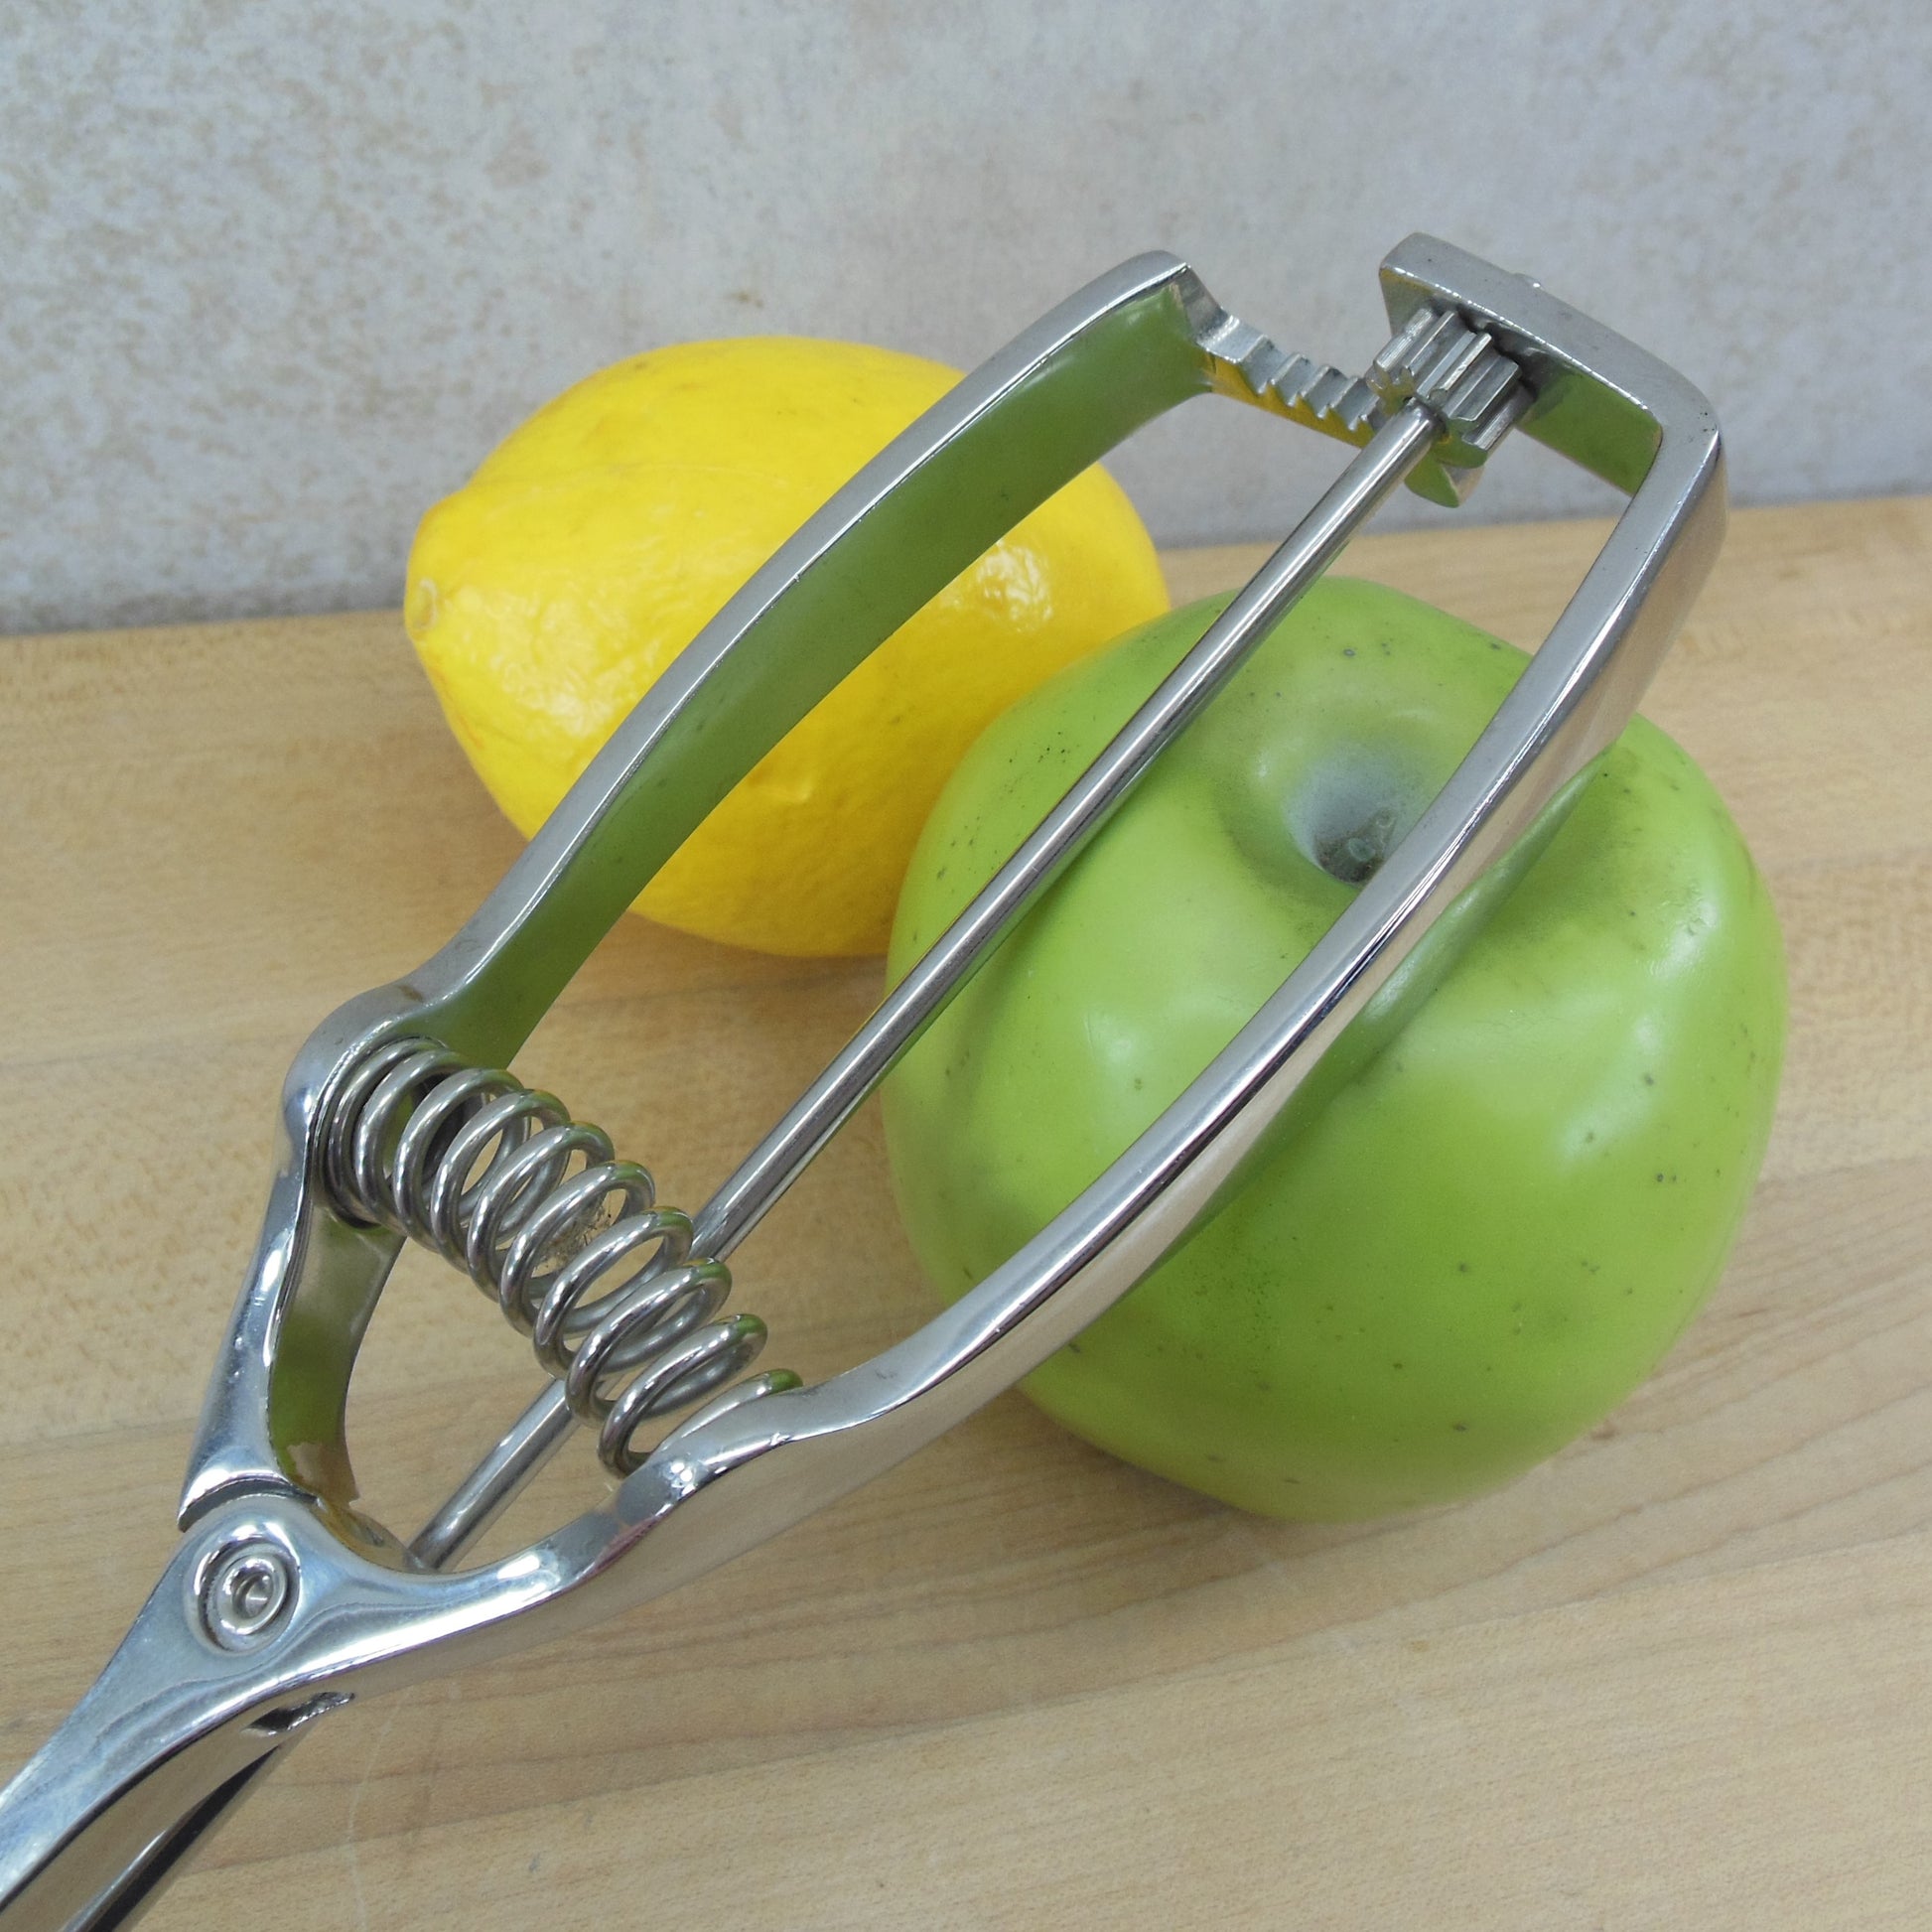 2 - VINTAGE PAMPERED CHEF STAINLESS STEEL SCOOP/MELON BALLERS